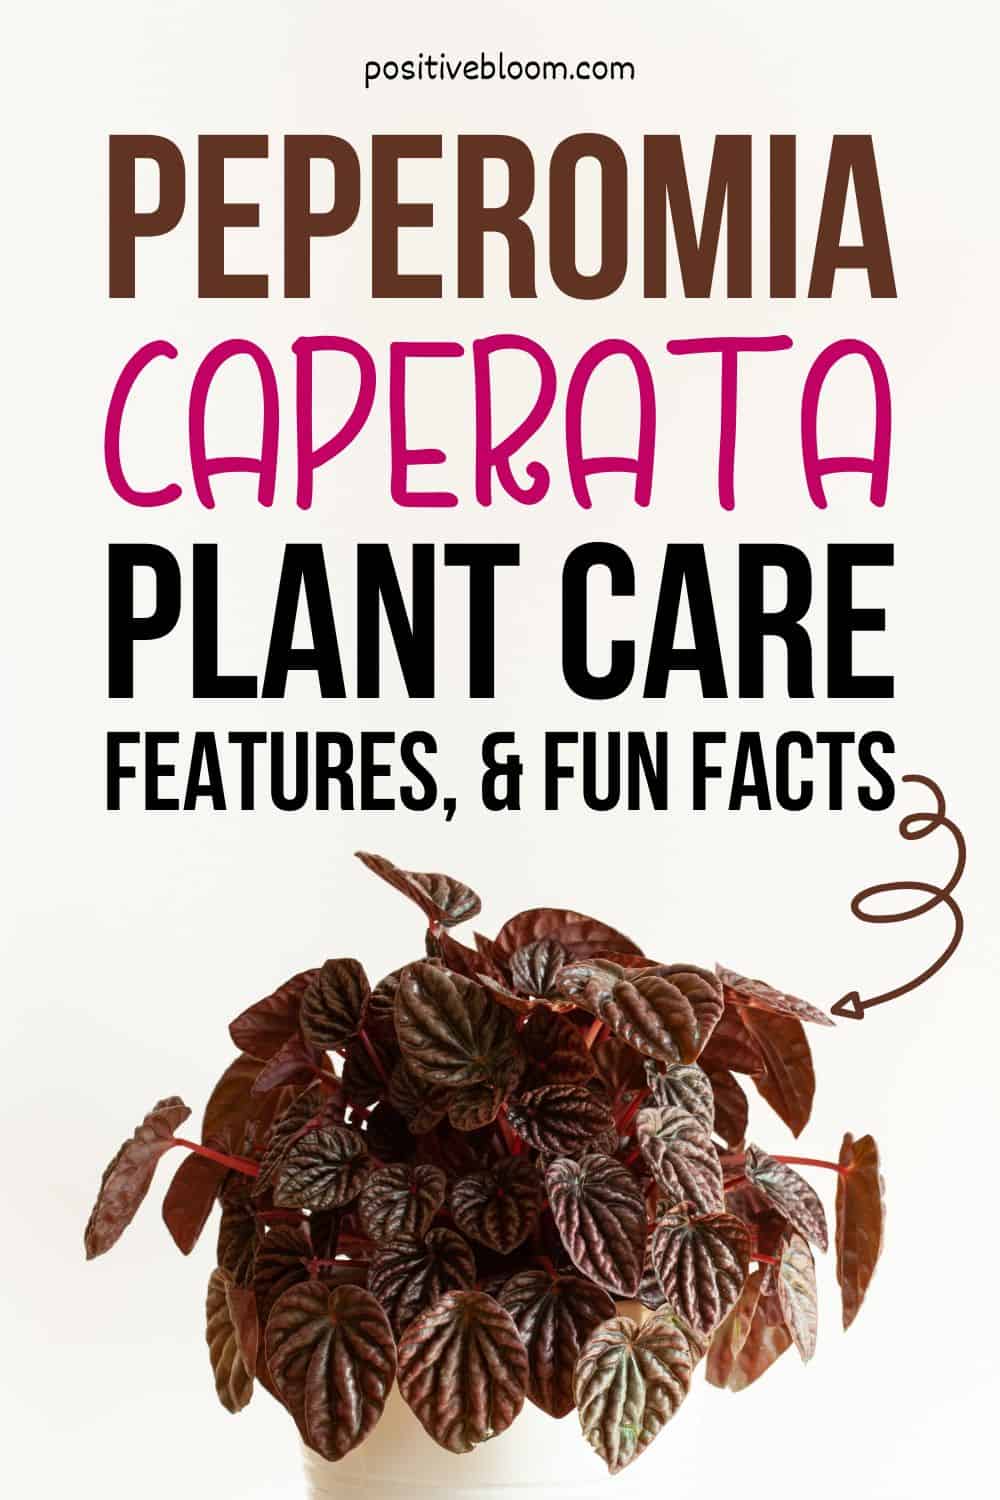 Peperomia Caperata Plant Care, Features, And Fun Facts Pinterest